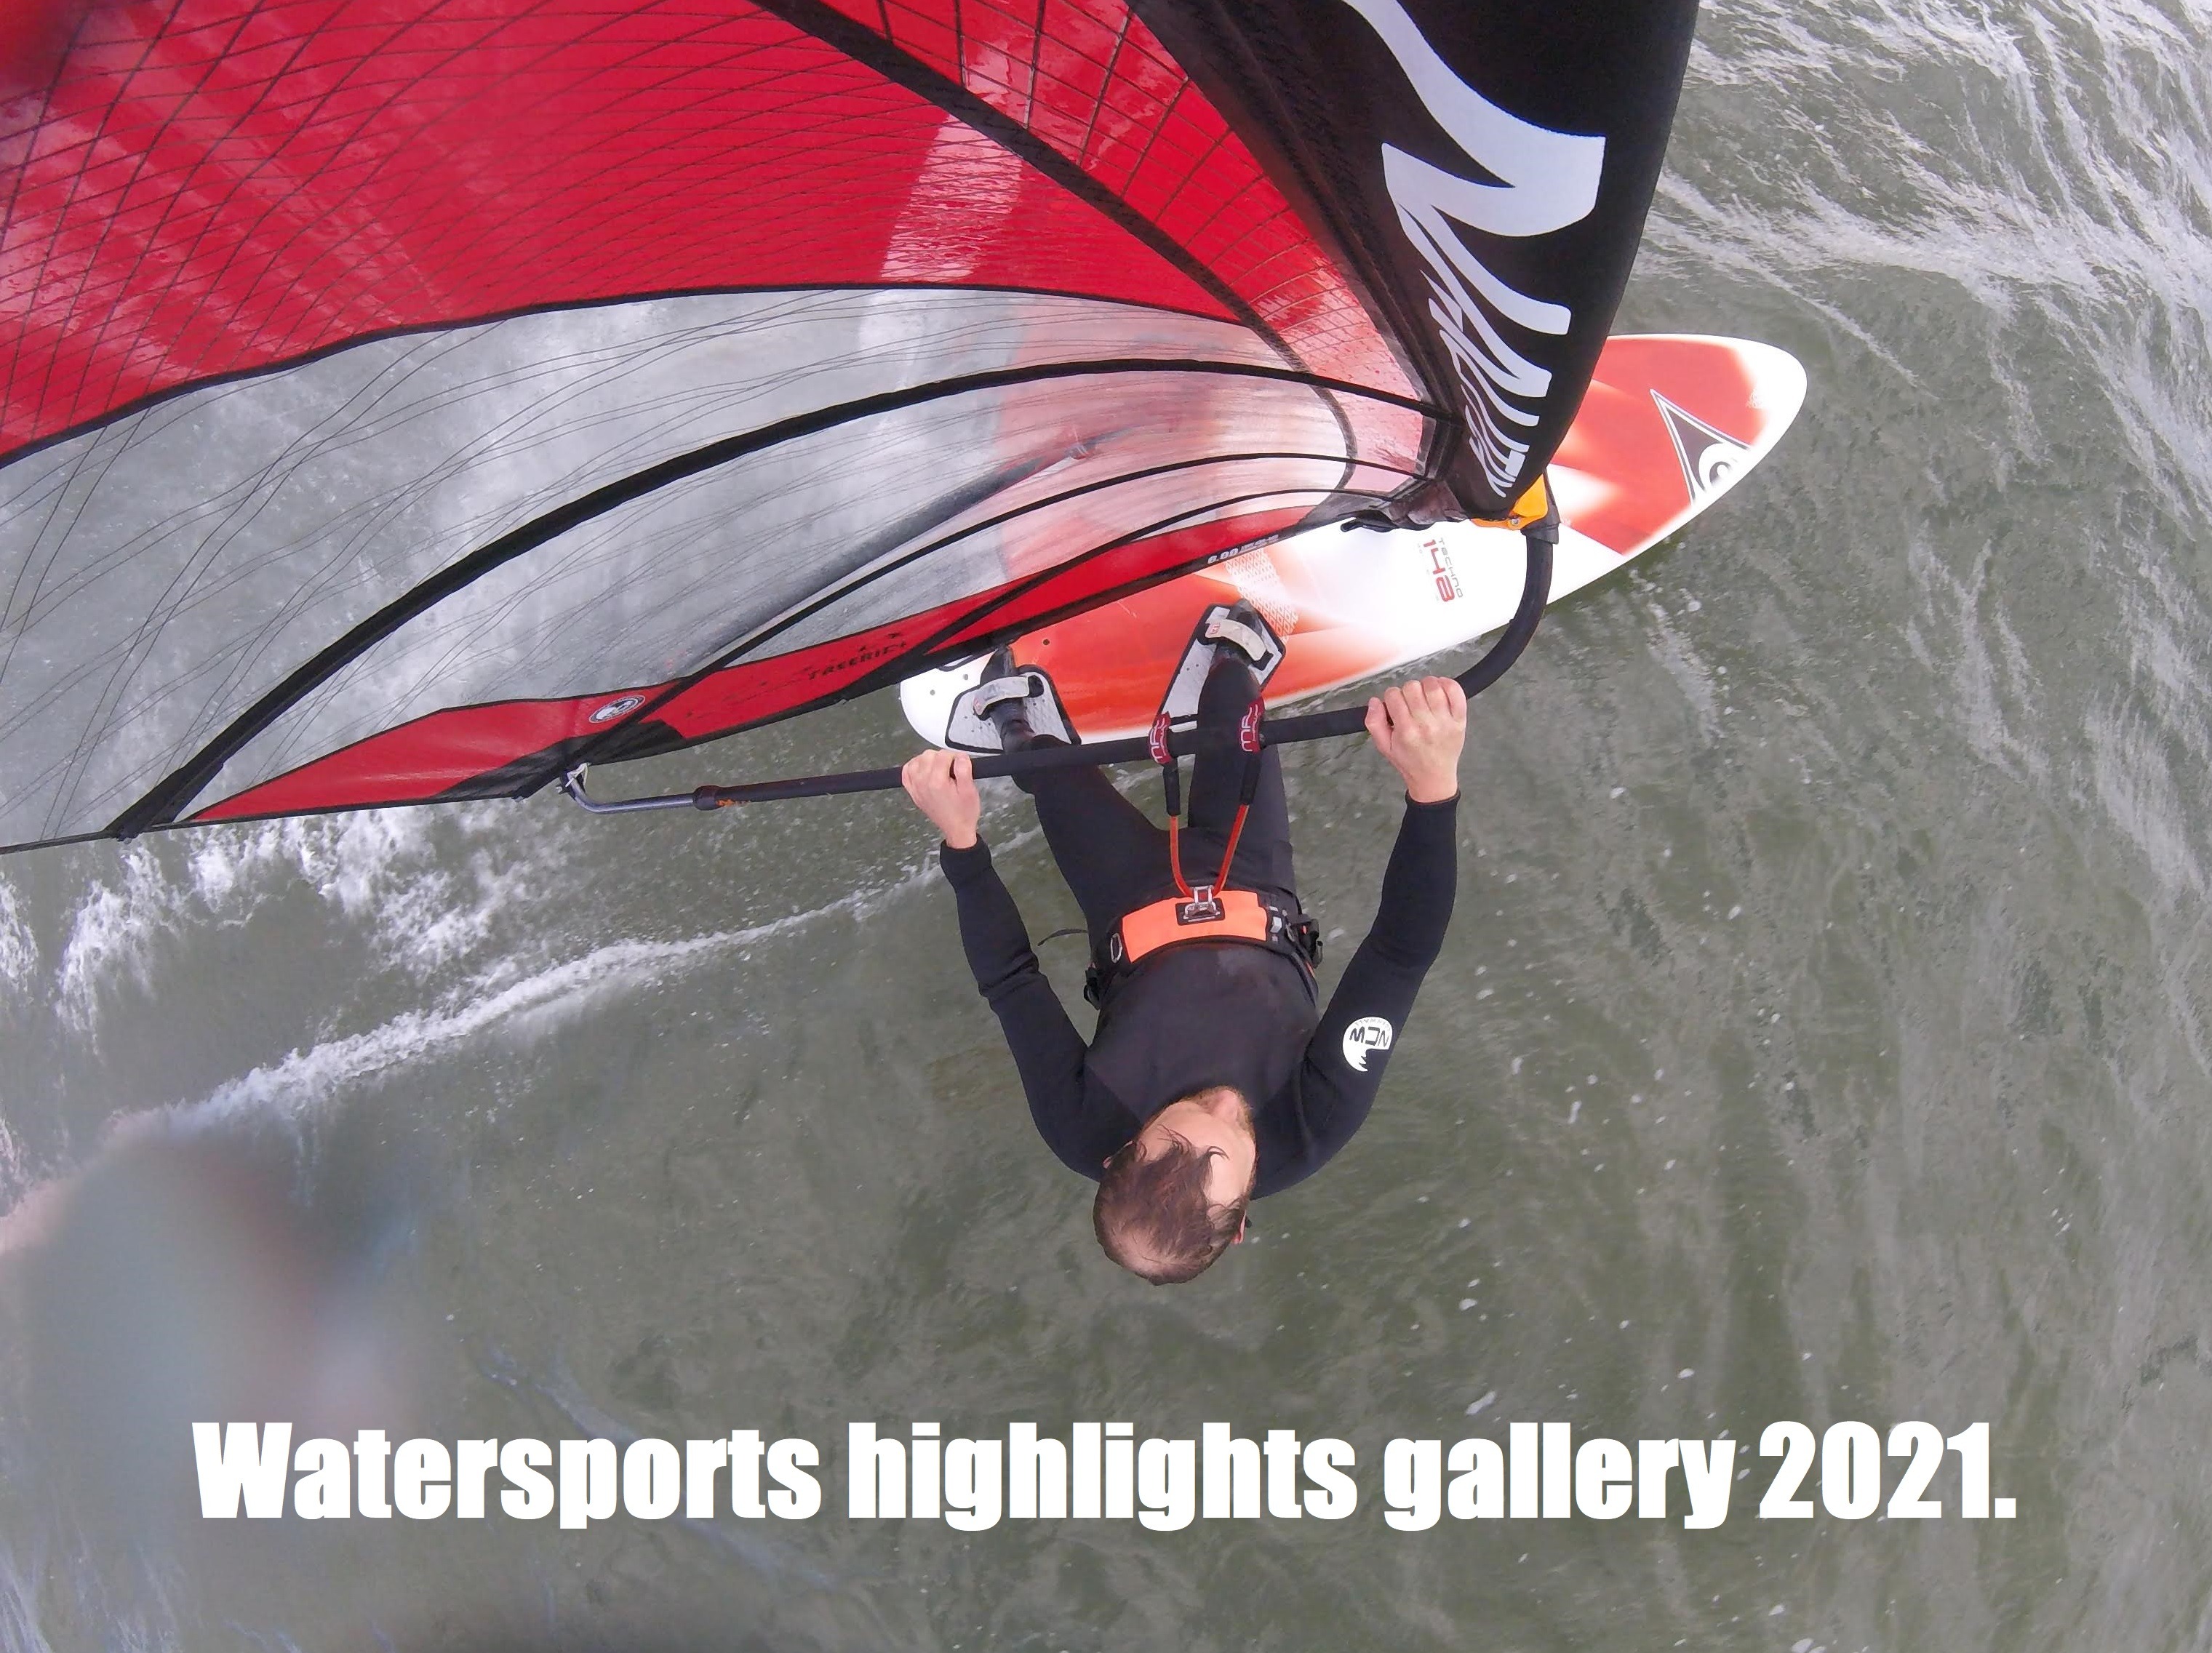 Watersports highlights gallery 2021.